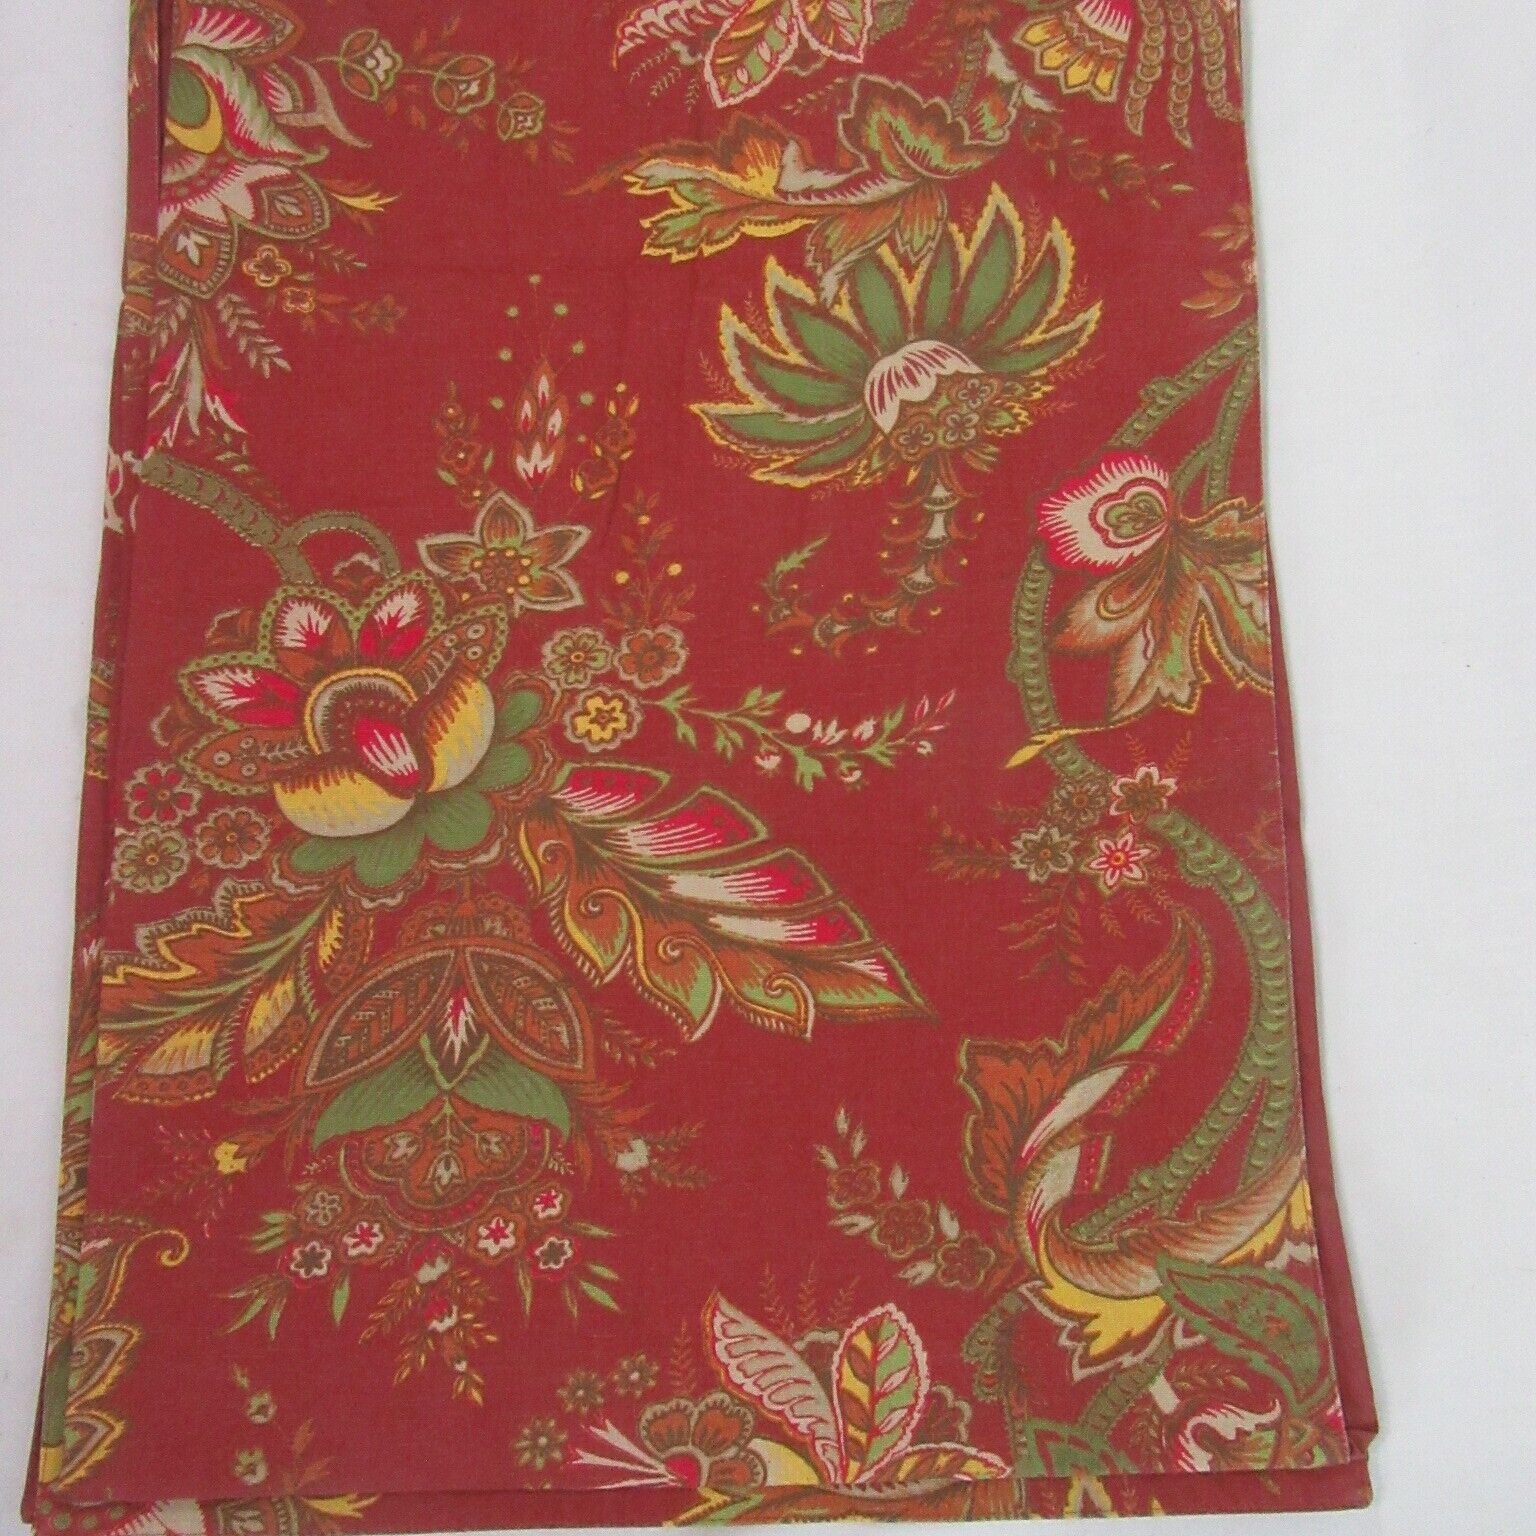 Pottery Barn Allstone Palampore Floral Red Cotton Linen 18 x 106 Table Runner - $46.00